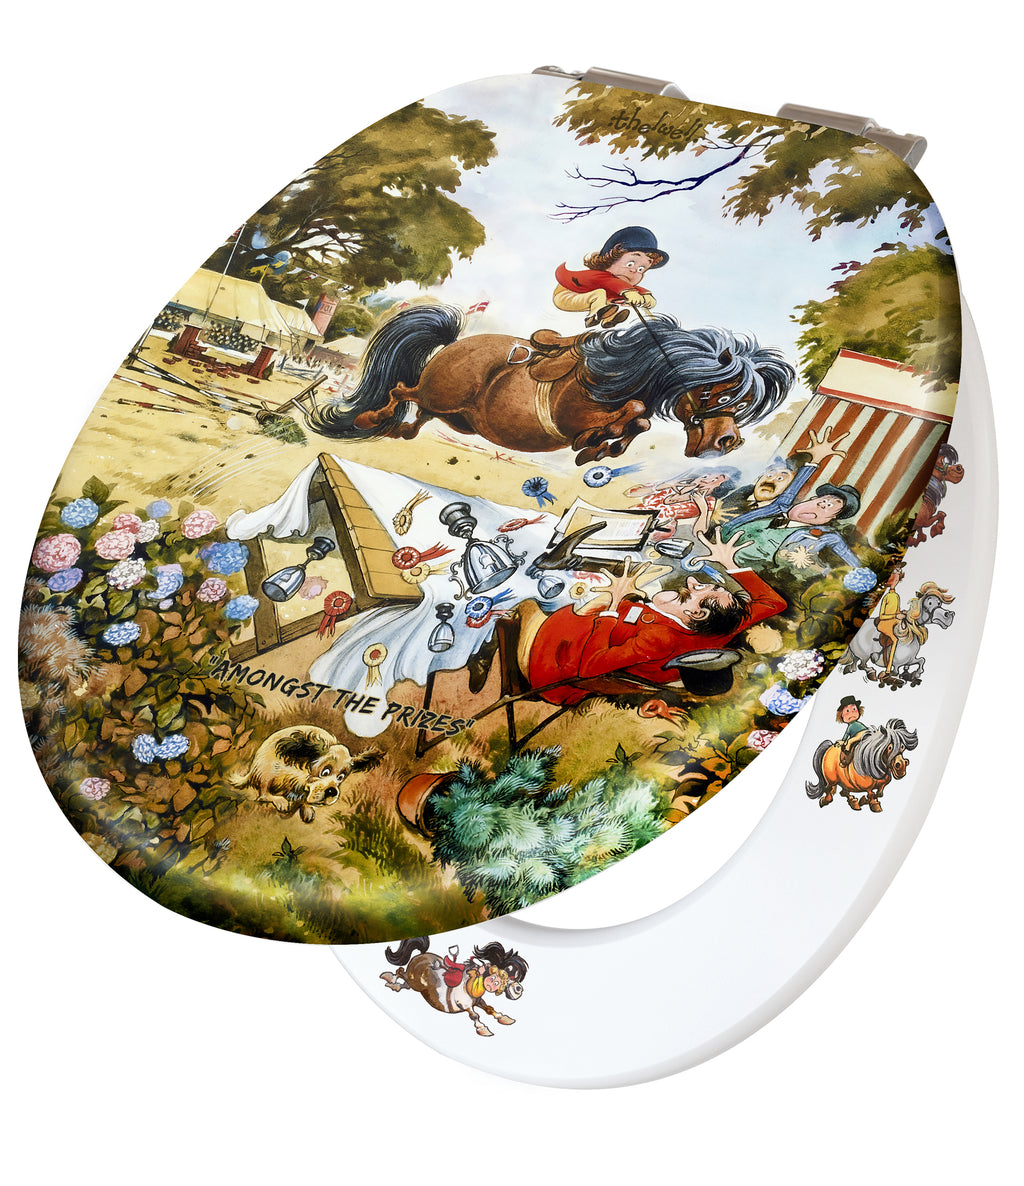 Riding School - Norman Thelwell - Toilet Seat.  BACK IN STOCK 30th NOVEMBER - PRE ORDER NOW